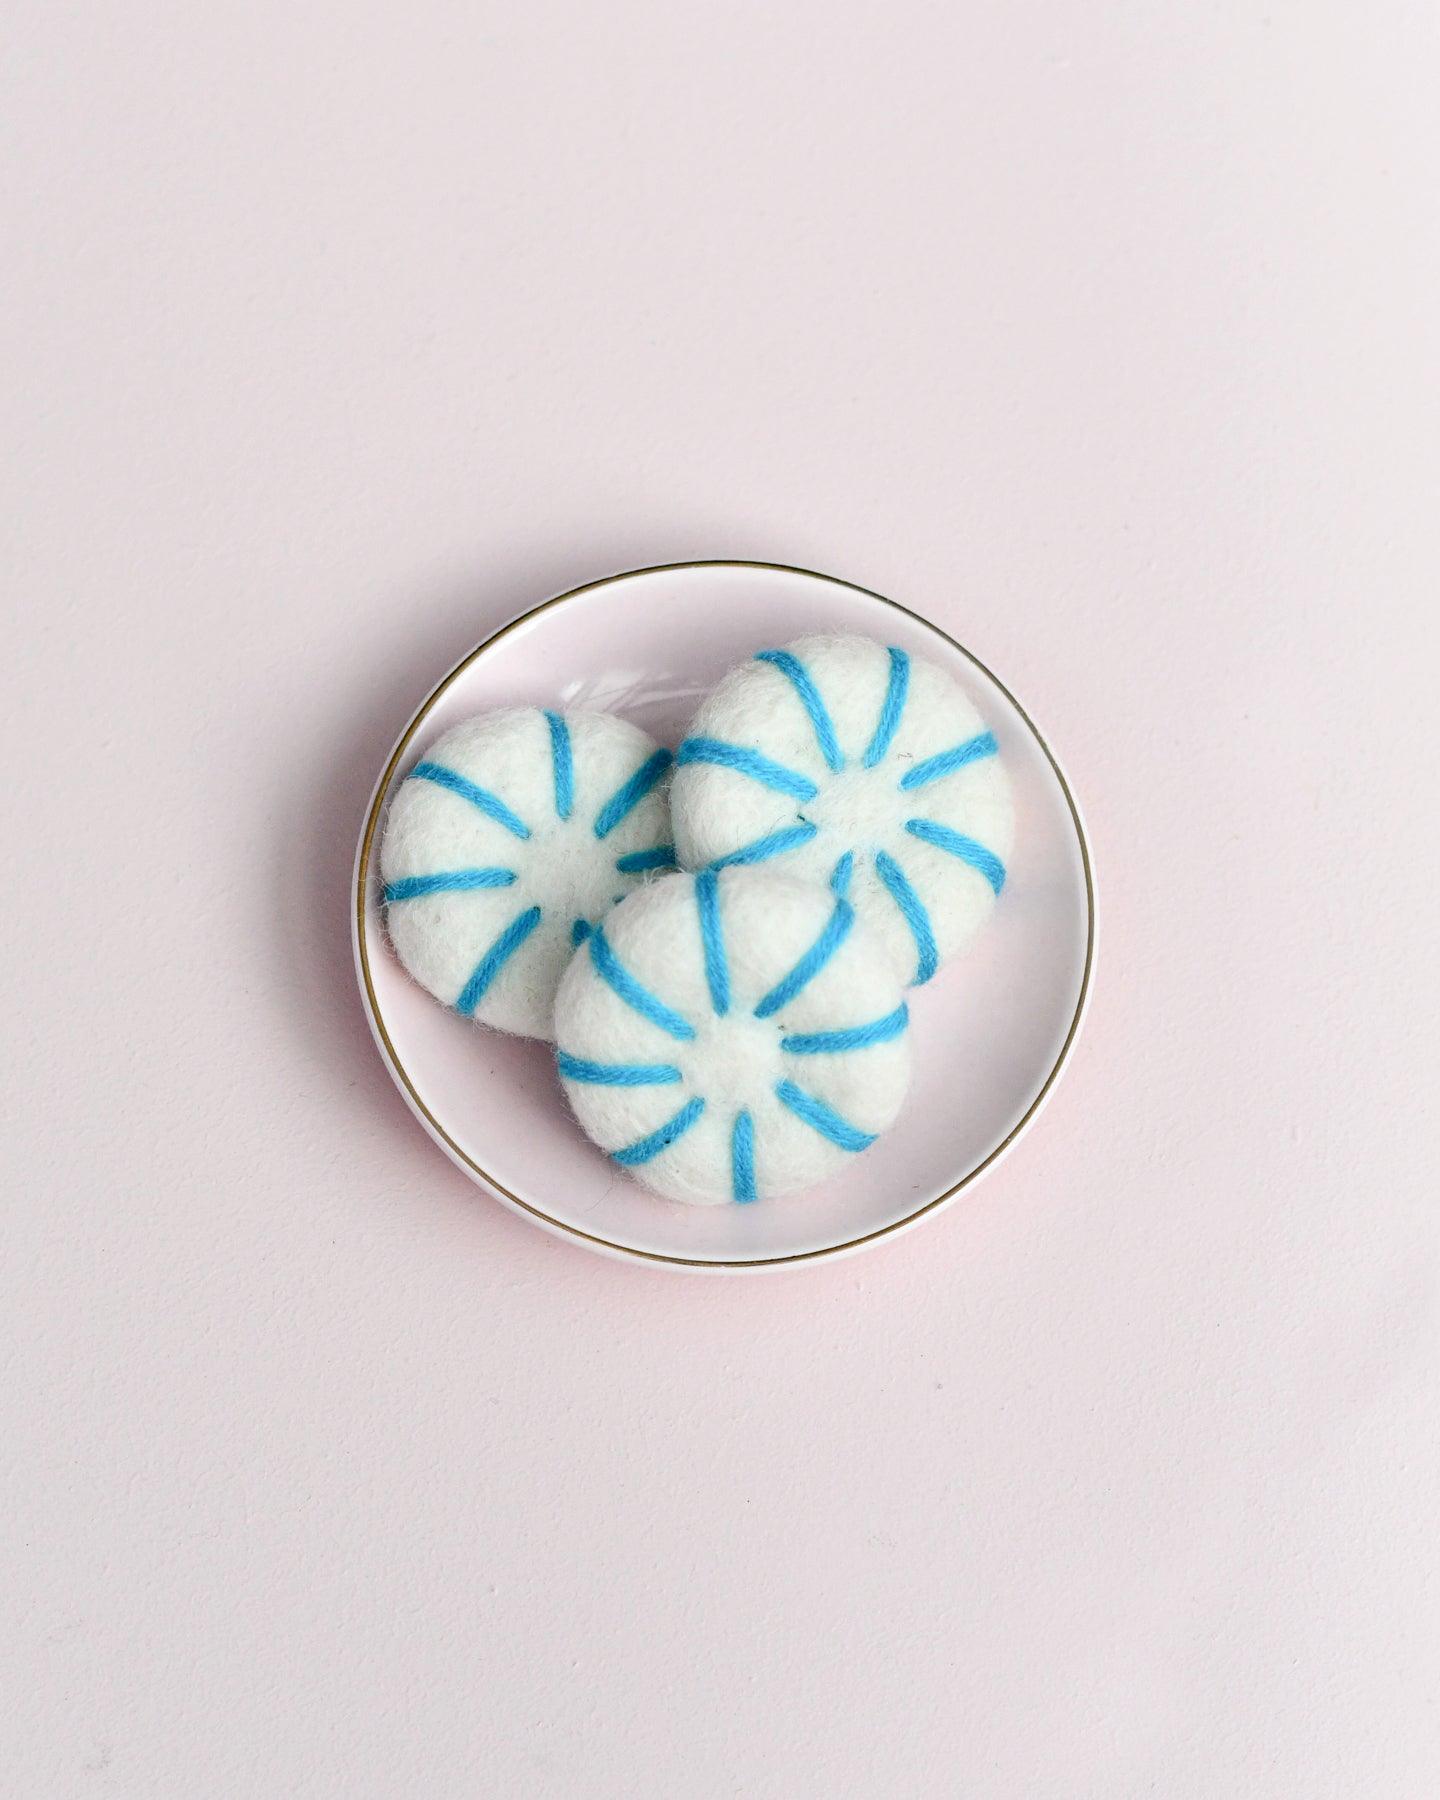 Felt Peppermint Candy Lollies (Mint Blue and White) - Set of 3